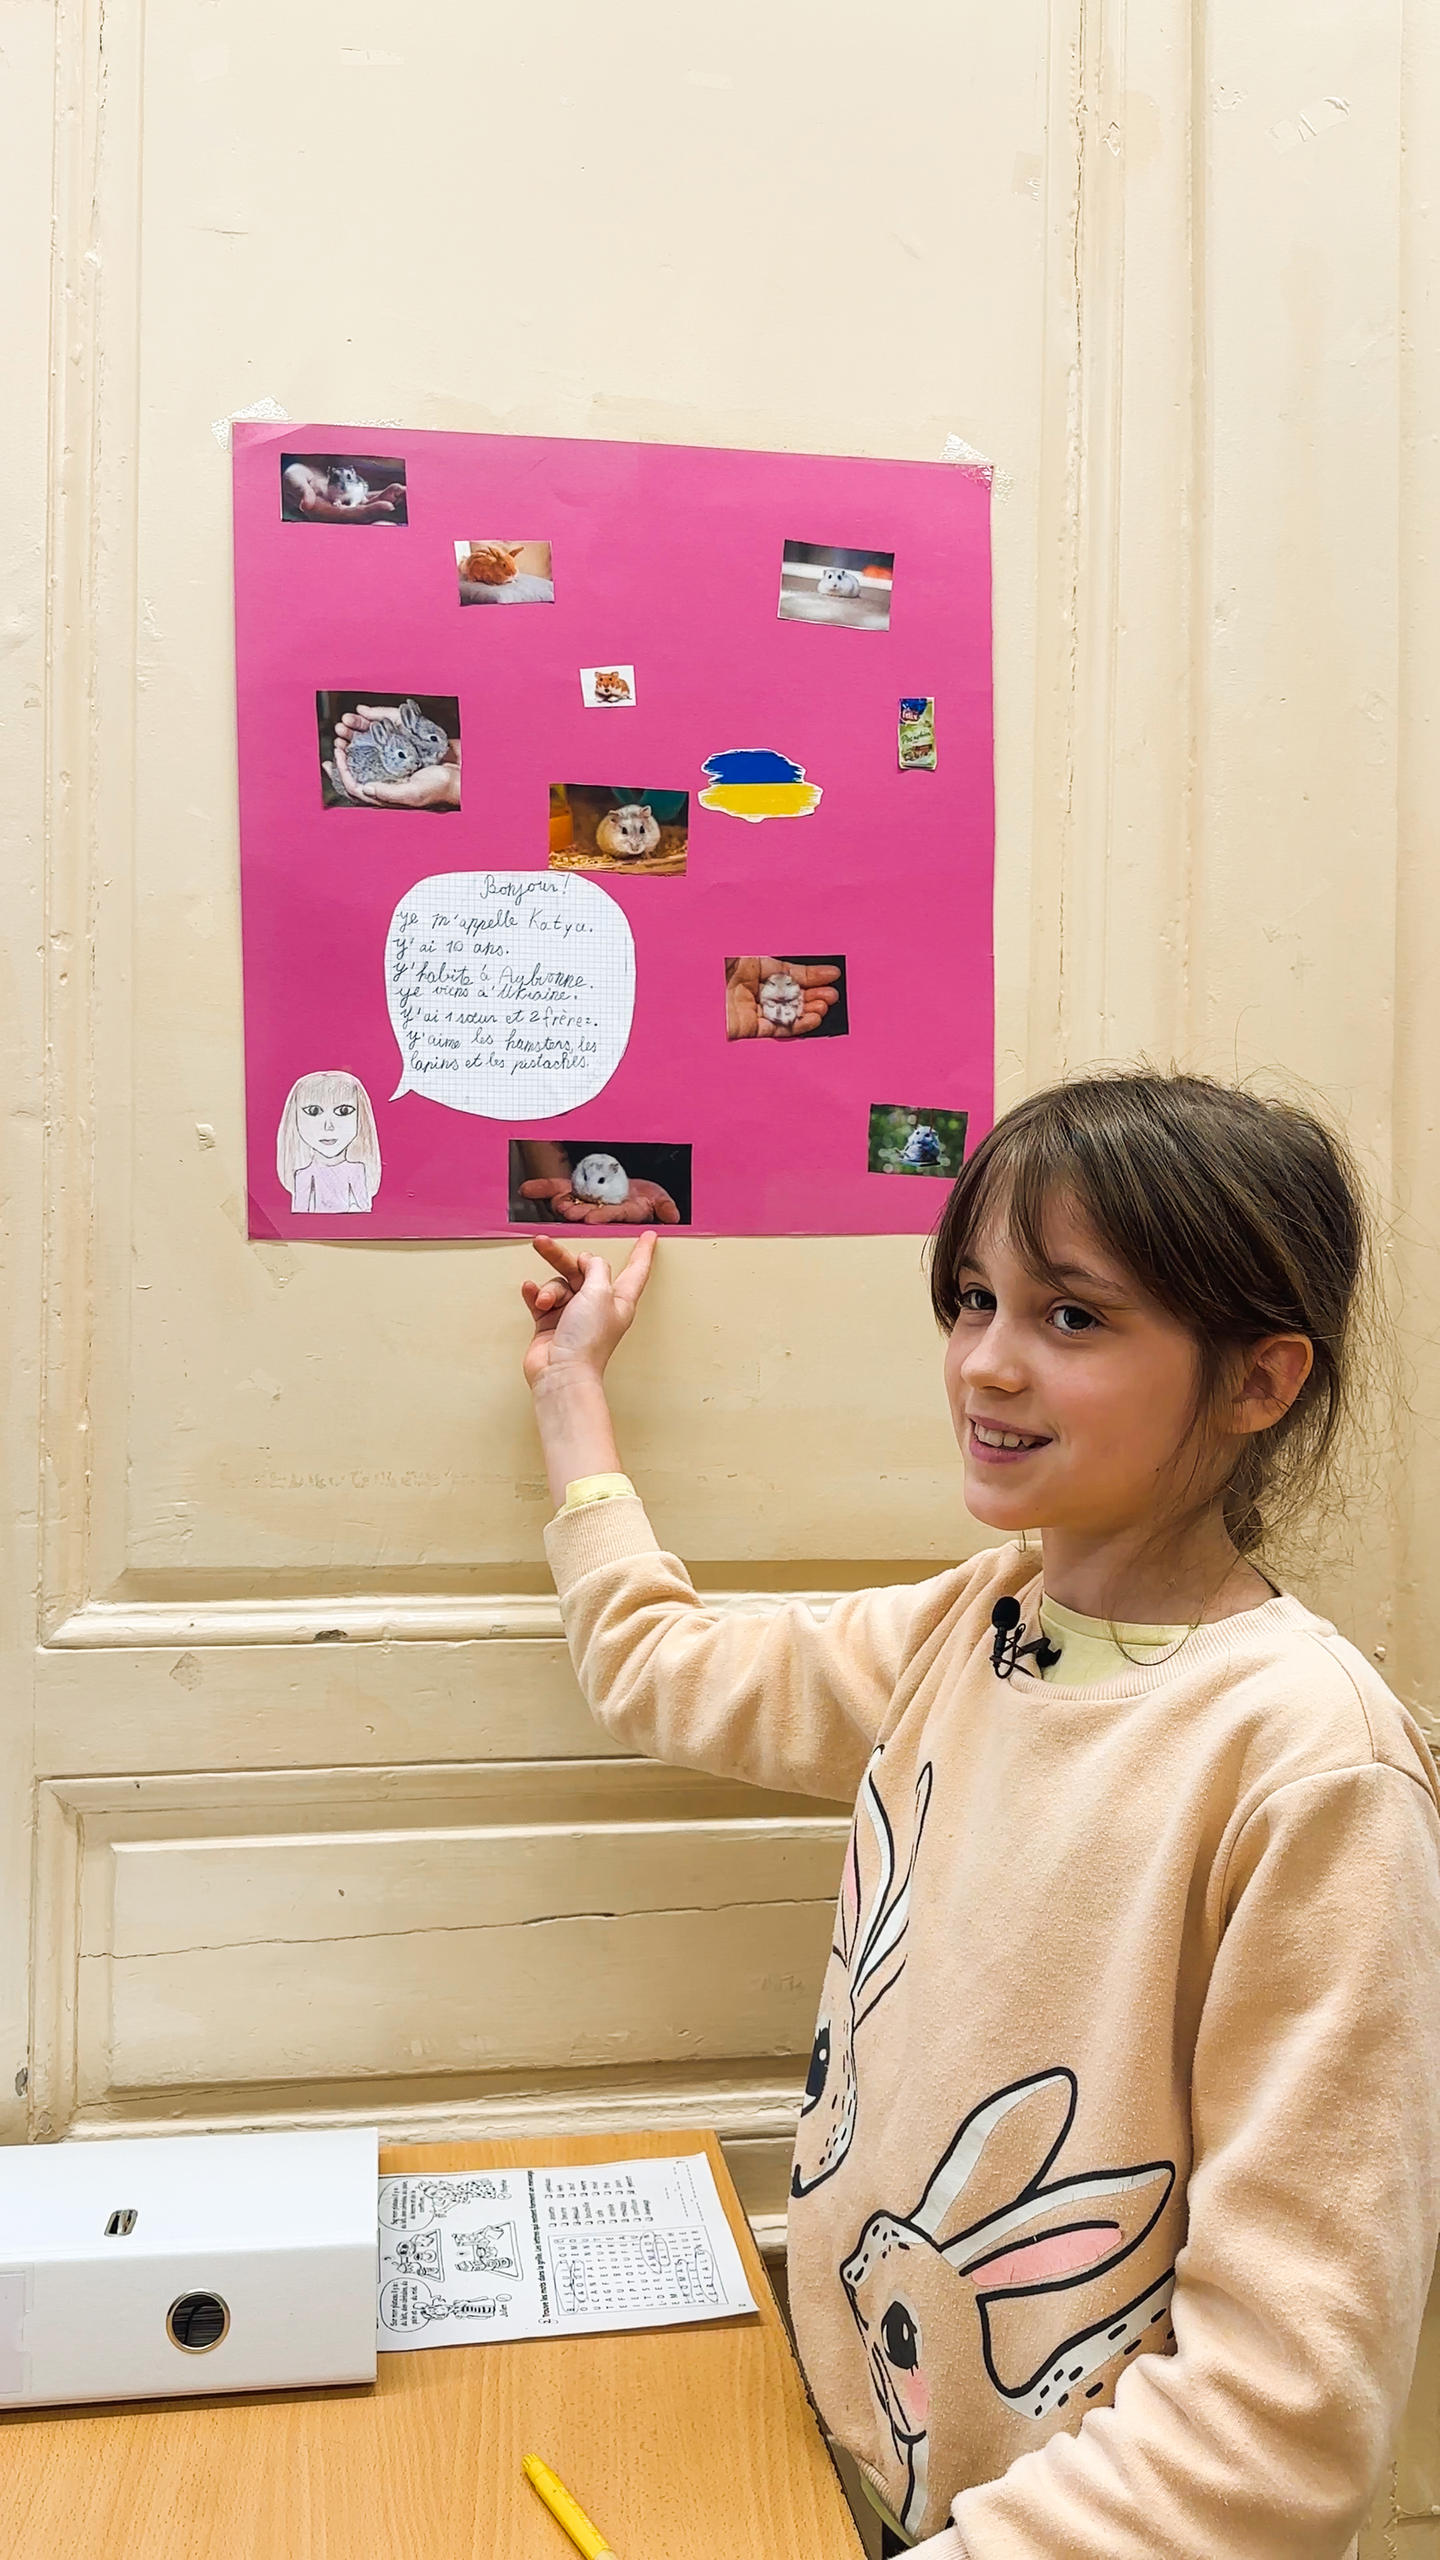 A girl showing a board she created with pictures of hamsters, the Ukrainian flag and her short description.